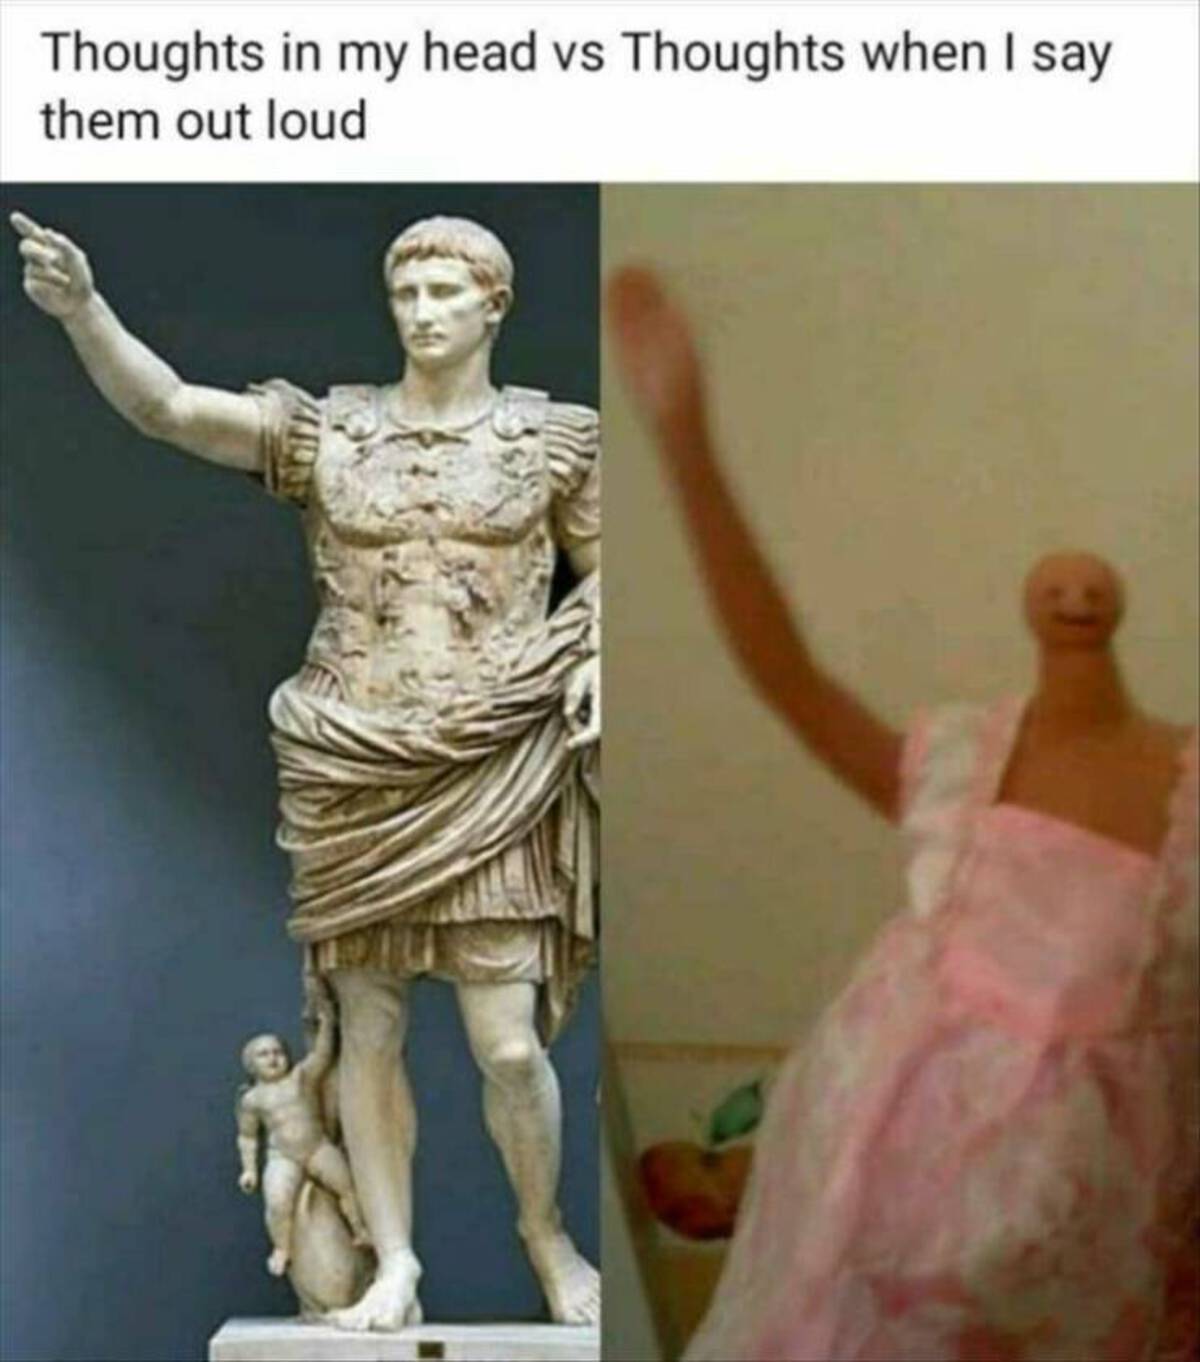 ancient greek art sculptures - Thoughts in my head vs Thoughts when I say them out loud